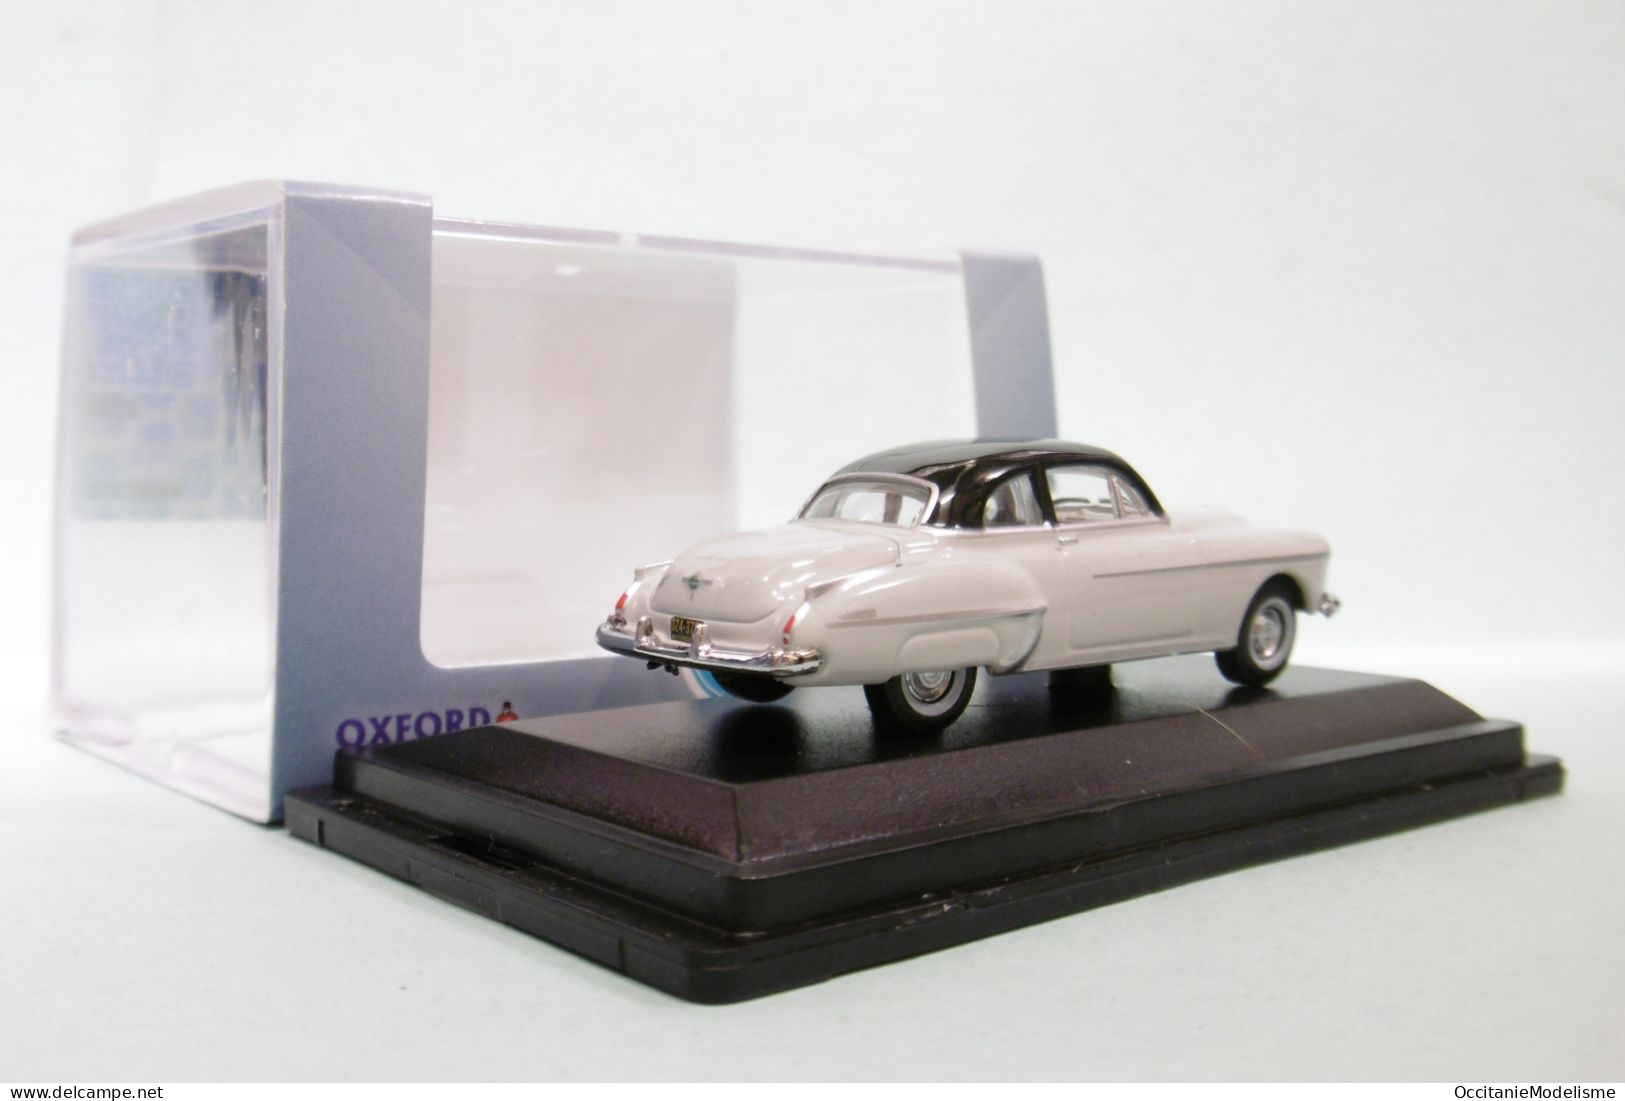 Oxford - OLDSMOBILE ROCKET 88 Gris Clair Voiture US Neuf HO 1/87 - Véhicules Routiers